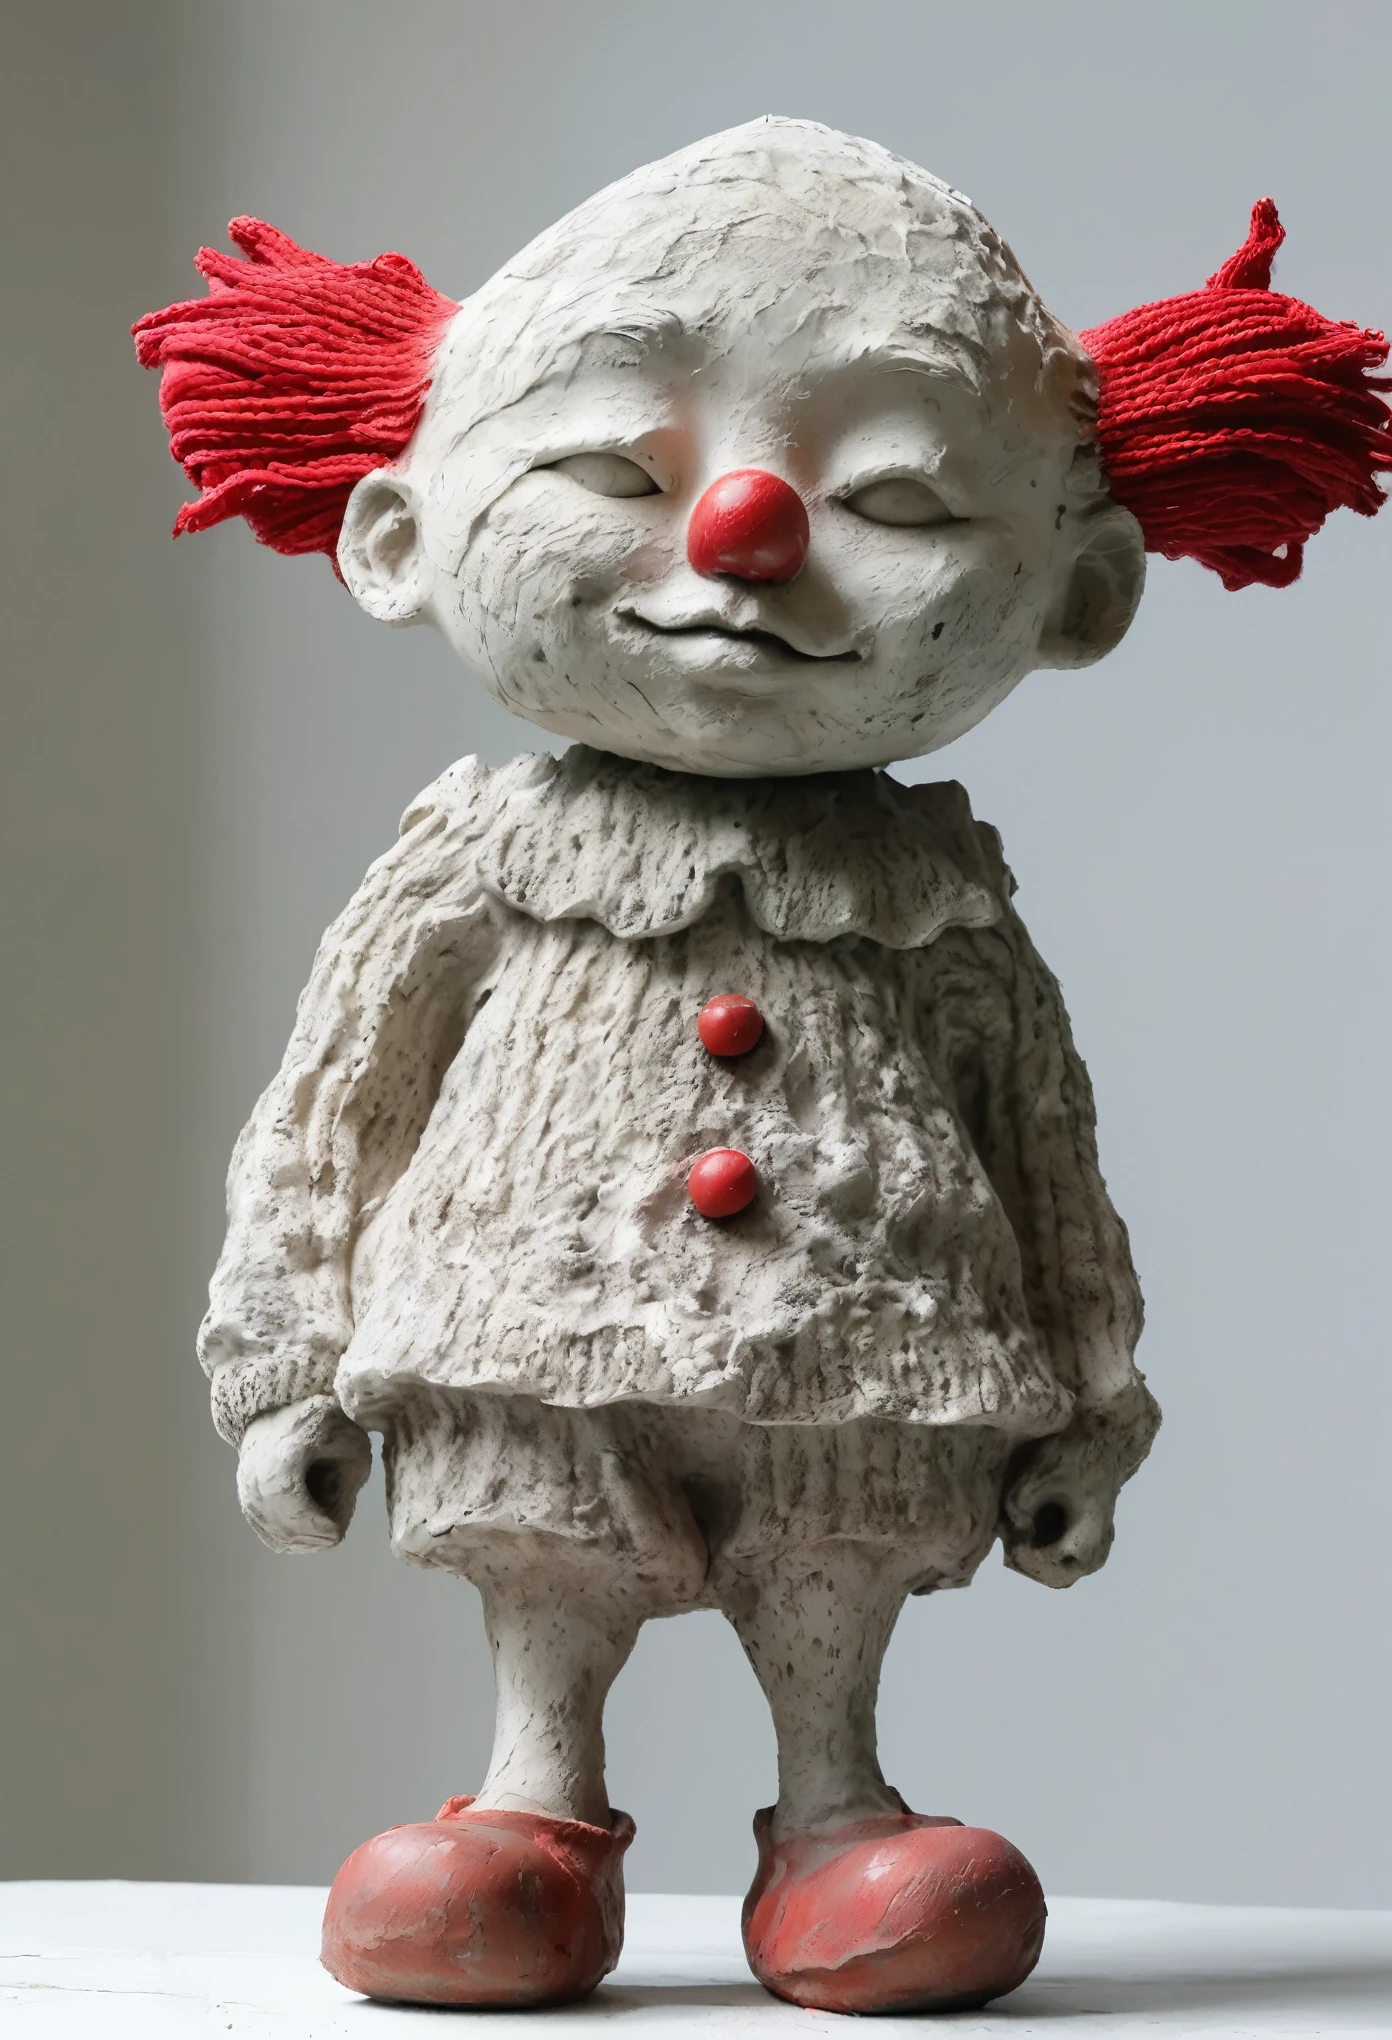 (best quality:1.2),ultra-light Clay, Clay, Pottery, Rough knitted texture, distressed, dirty, mineral pigments, 3D Clay sculpture art, Clay sculpture, Rough surface, (Art work，clown，Red nose，solitary figure，whole body，Barefoot，cover up,Solitary,)